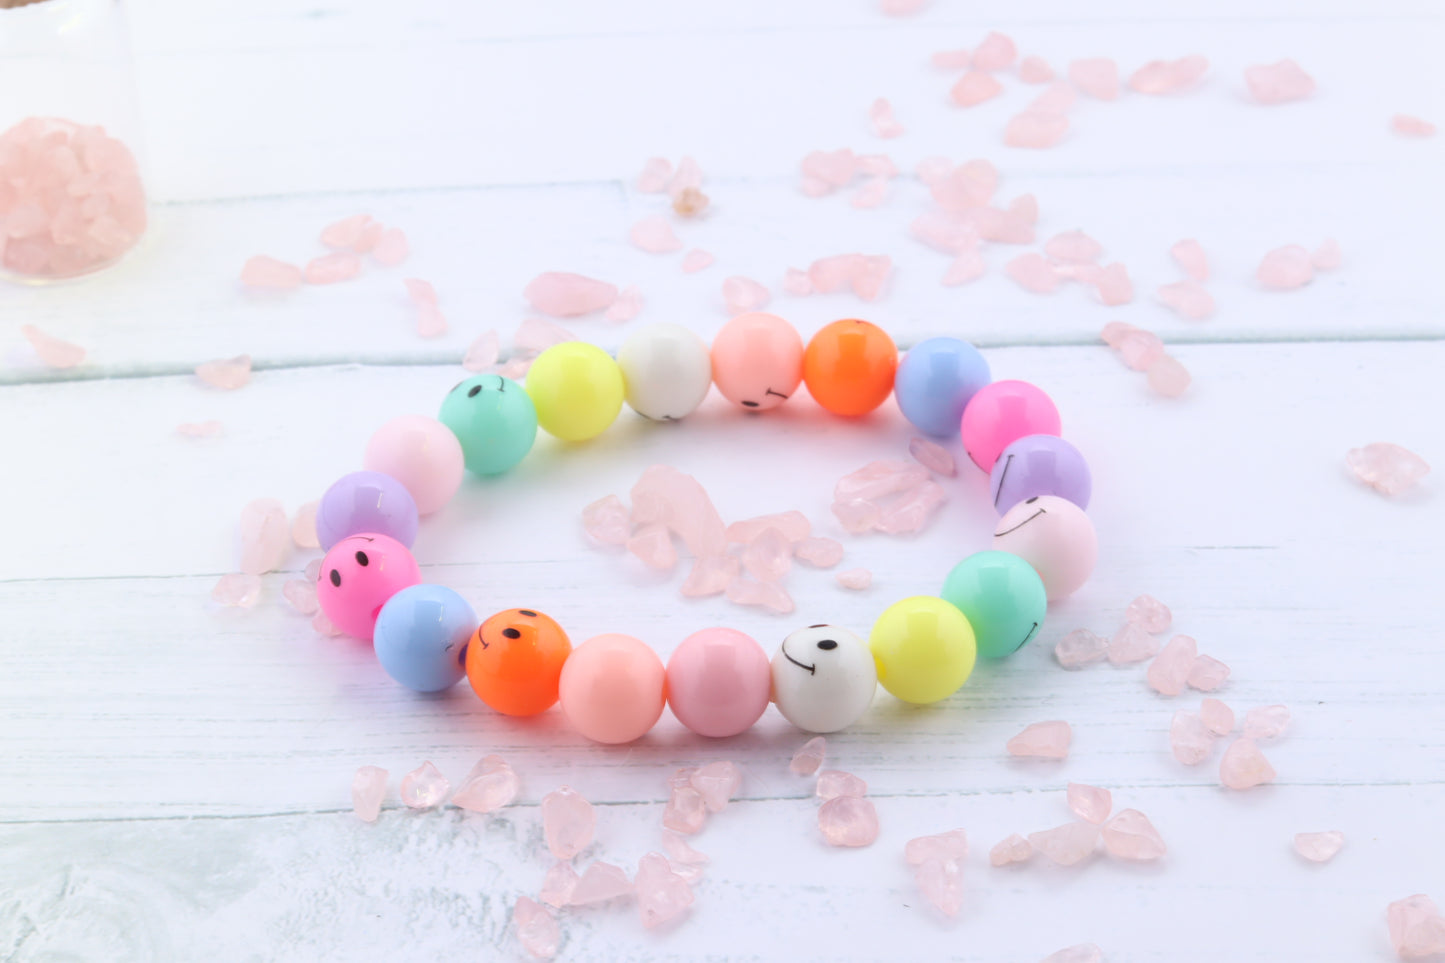 Handmade Pastel Acrylic Beaded Stretch Bracelet with Smiley Faces. Multi-Color Pastel, Fun Colored Beads.